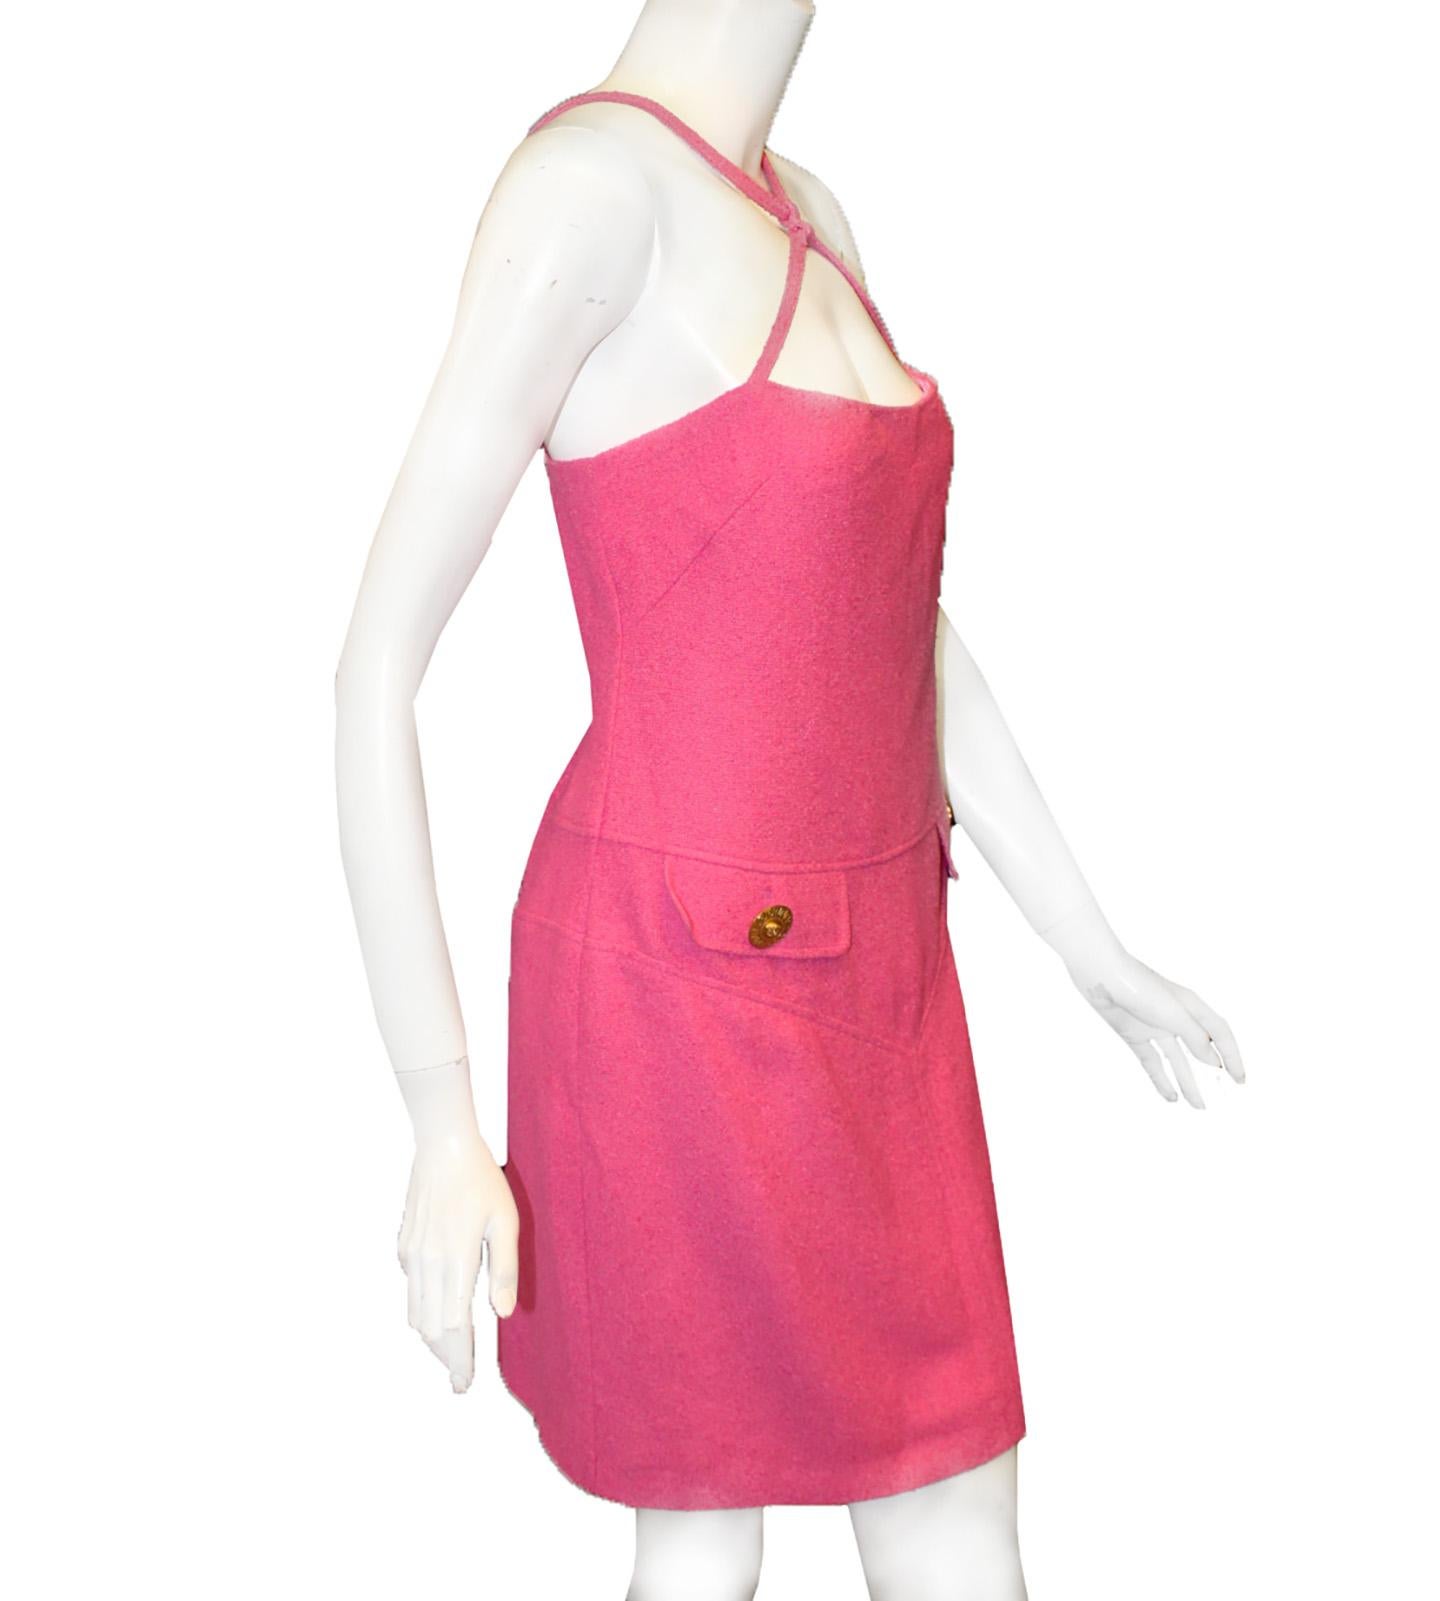 Versace fuschia crisscross strap dress features two faux front flap pockets enhanced by a gold tone signature Versace button.  Thin straps crisscross at the decolletage and terminate at the back.  This modern A line summer dress is fully lined in